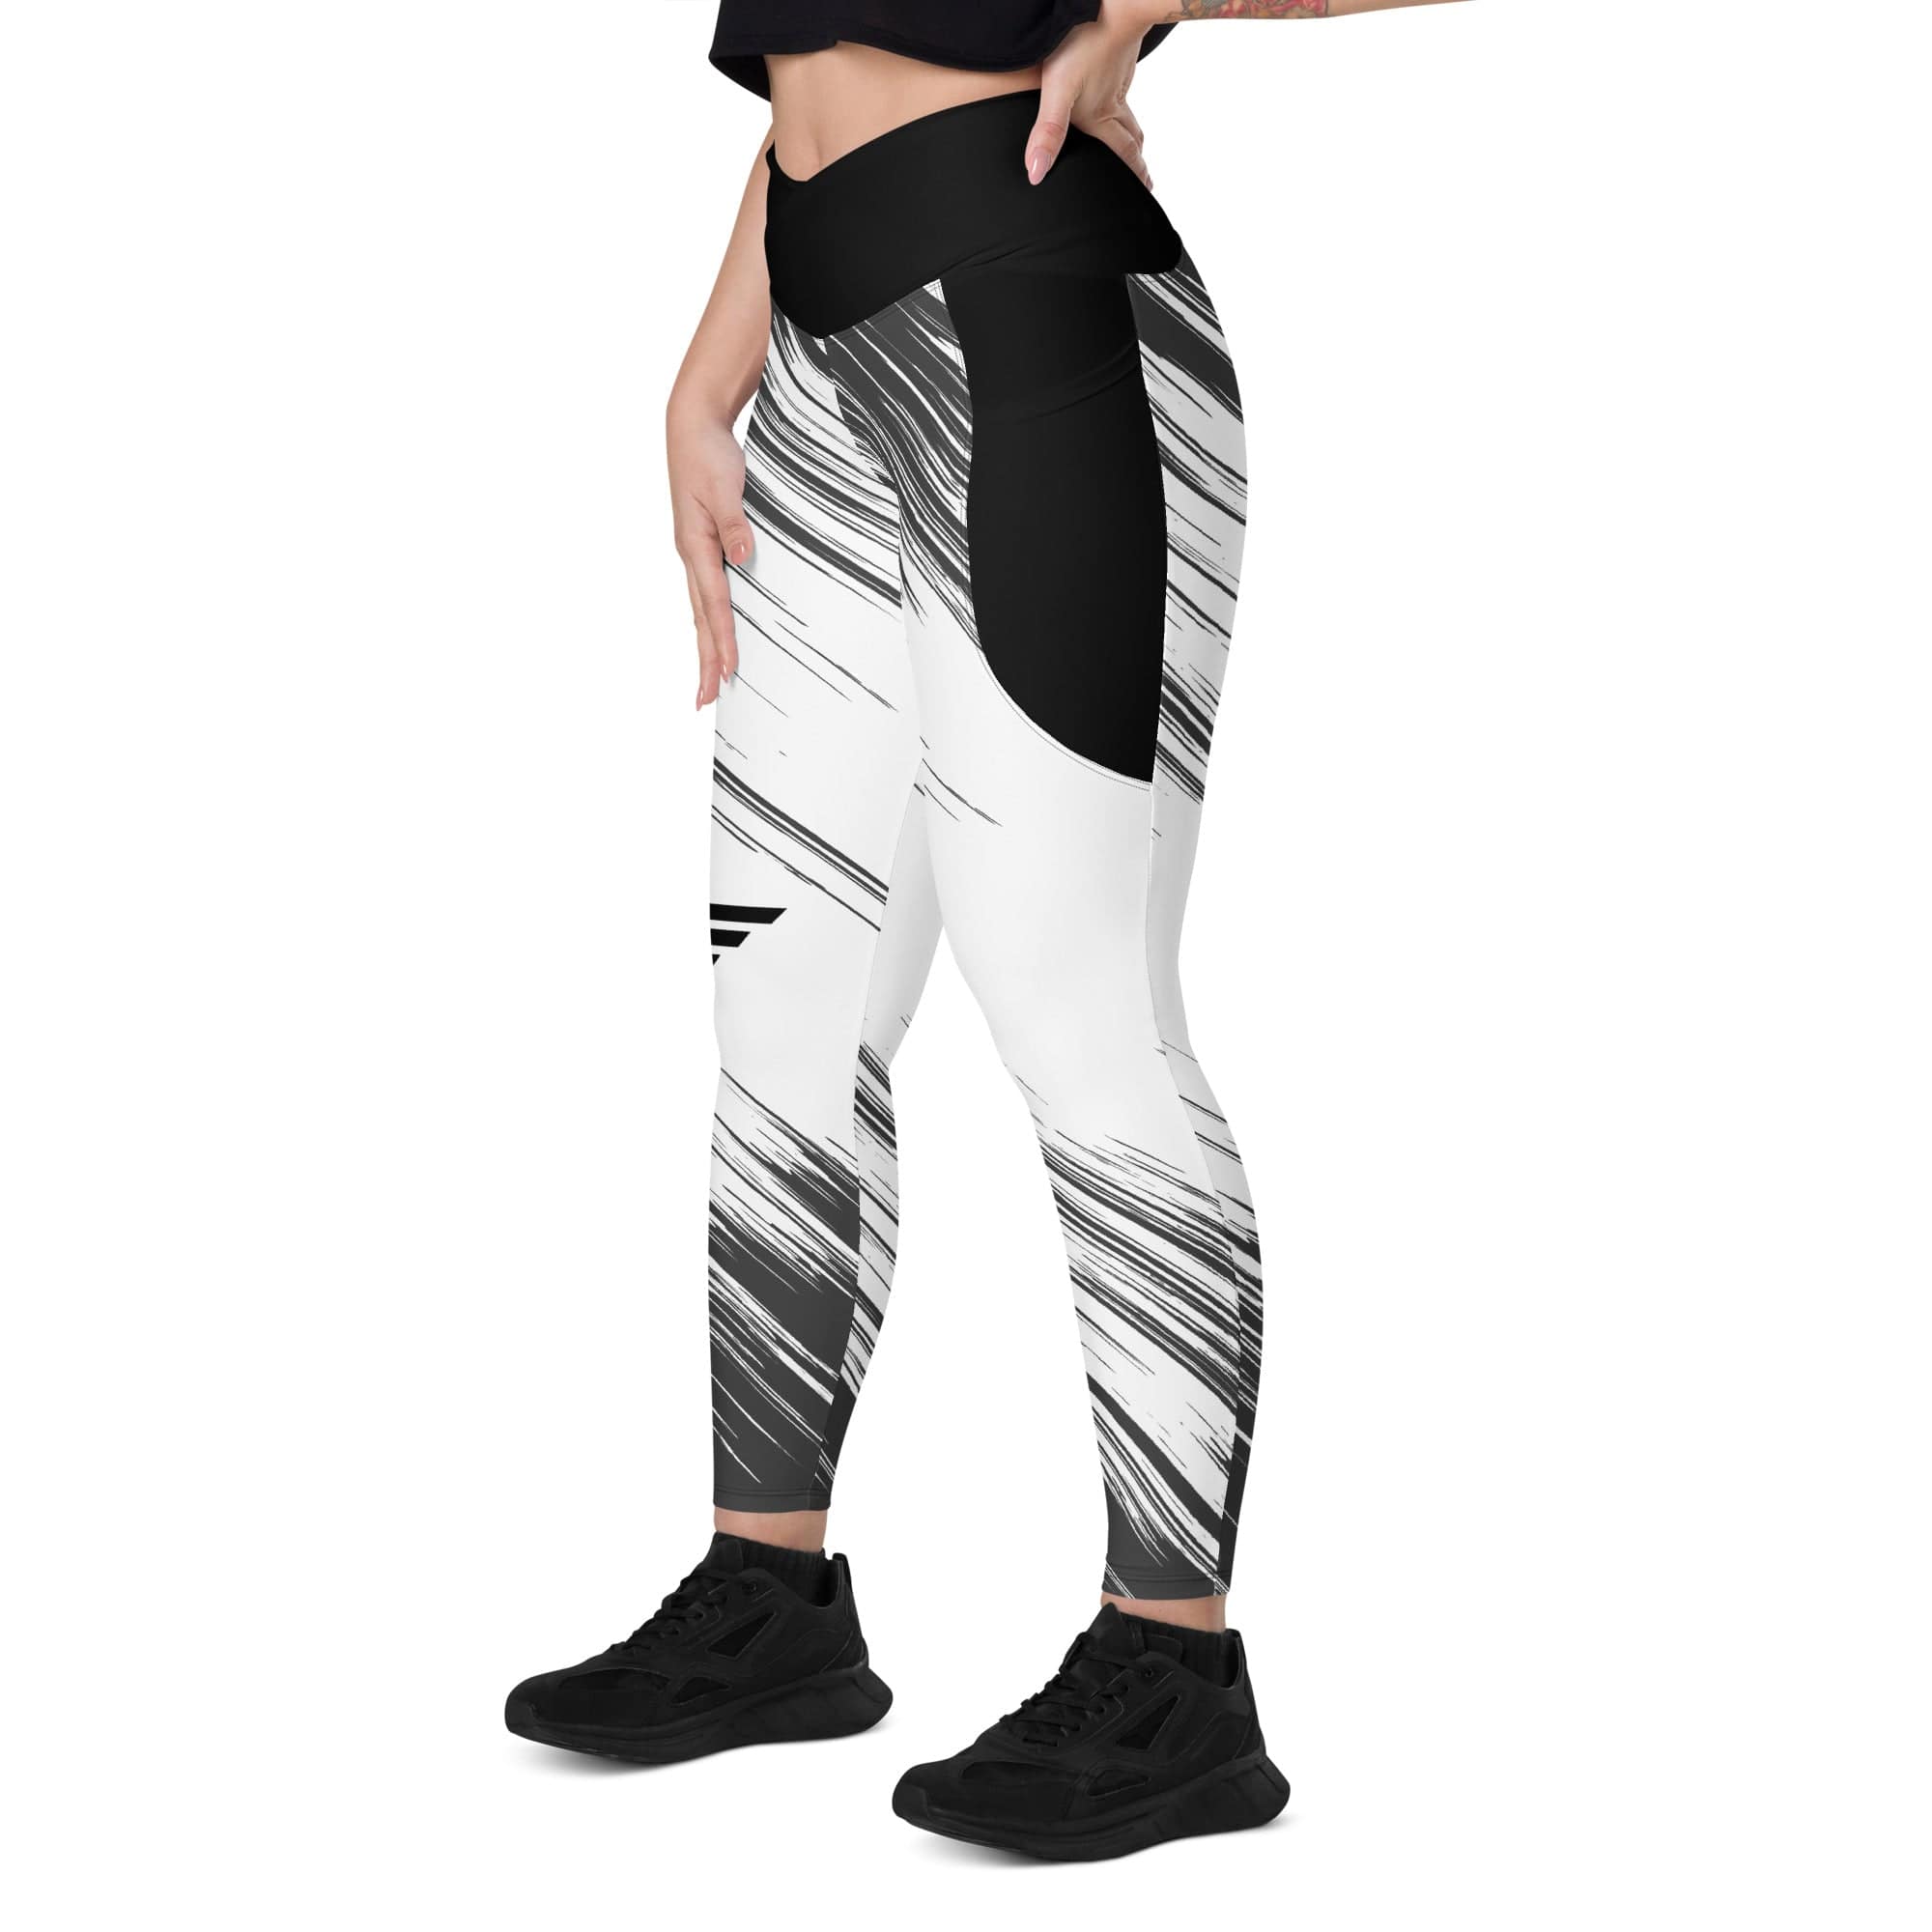 Fire Cornhole Crossover leggings with pockets in black and white